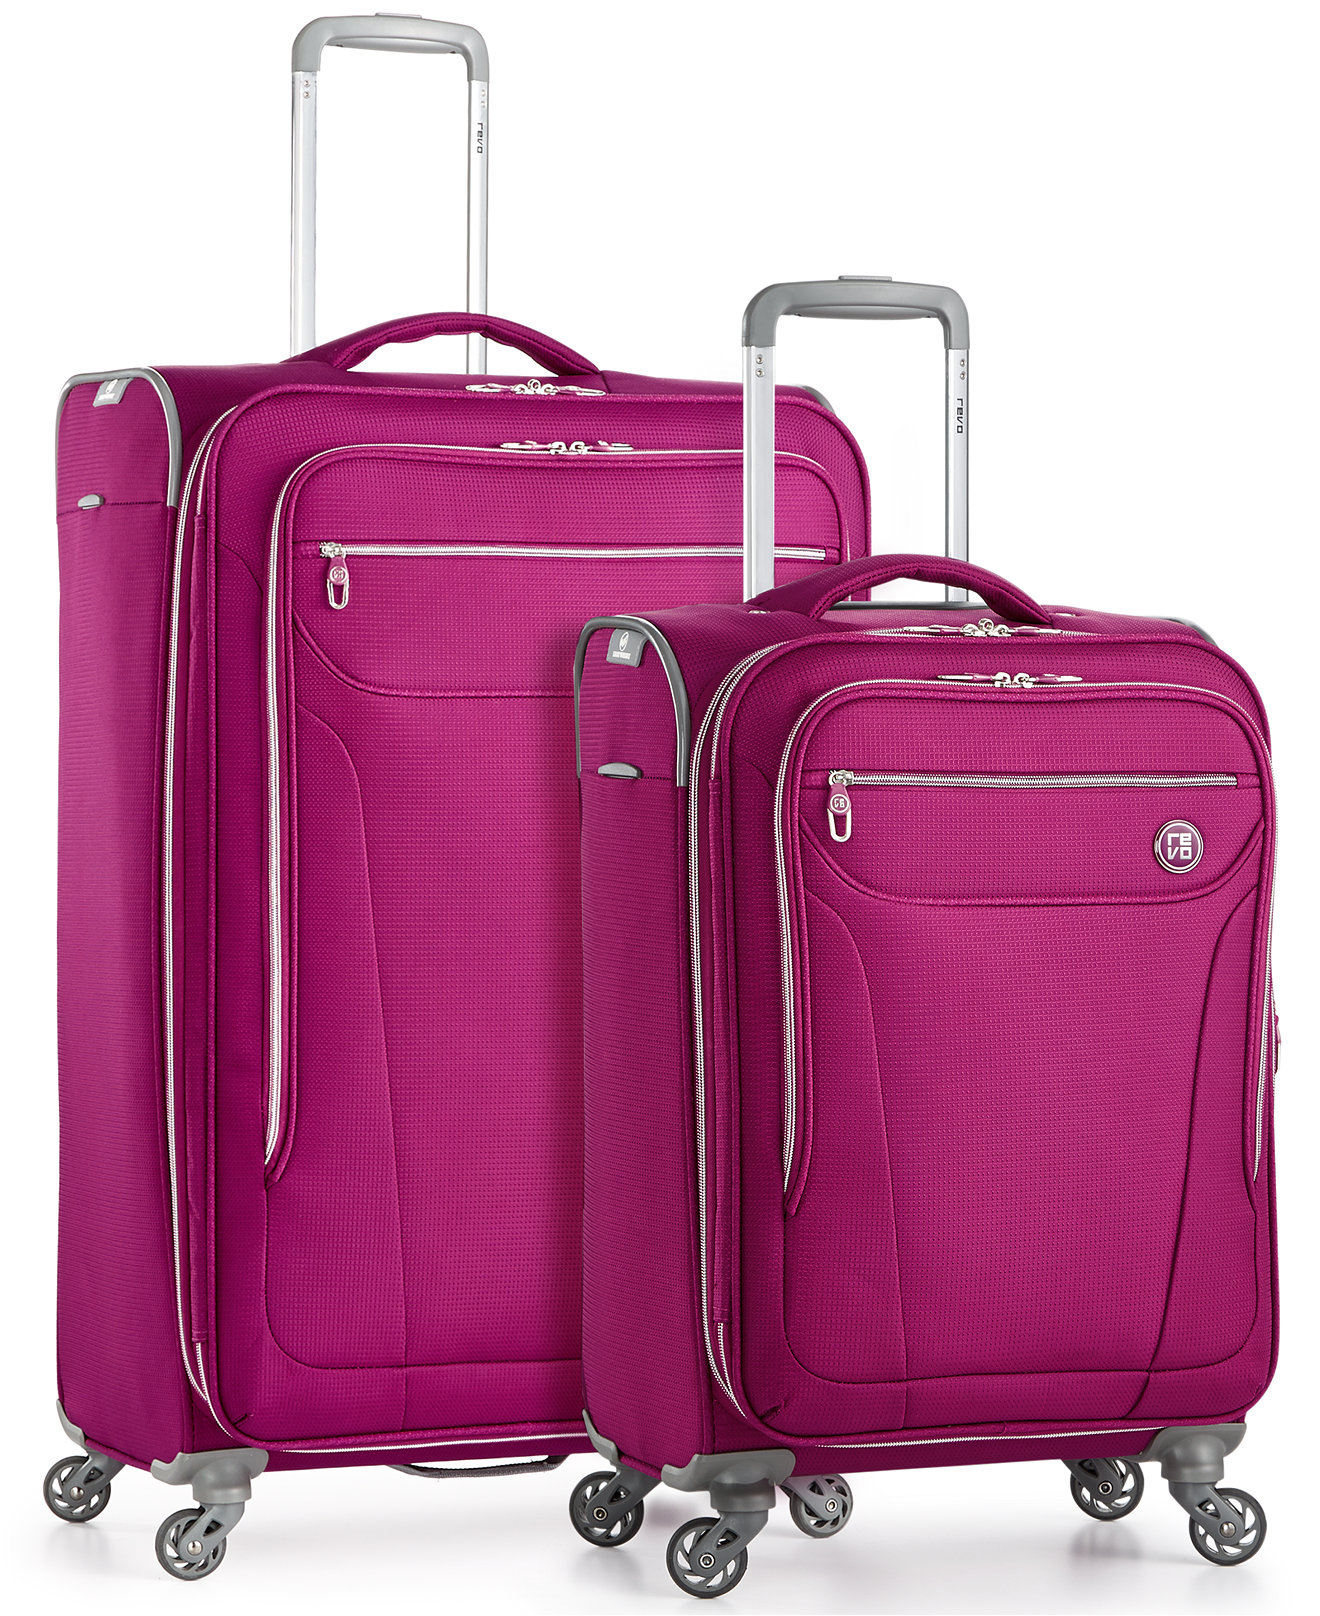 What are some inexpensive luggage shipping options?